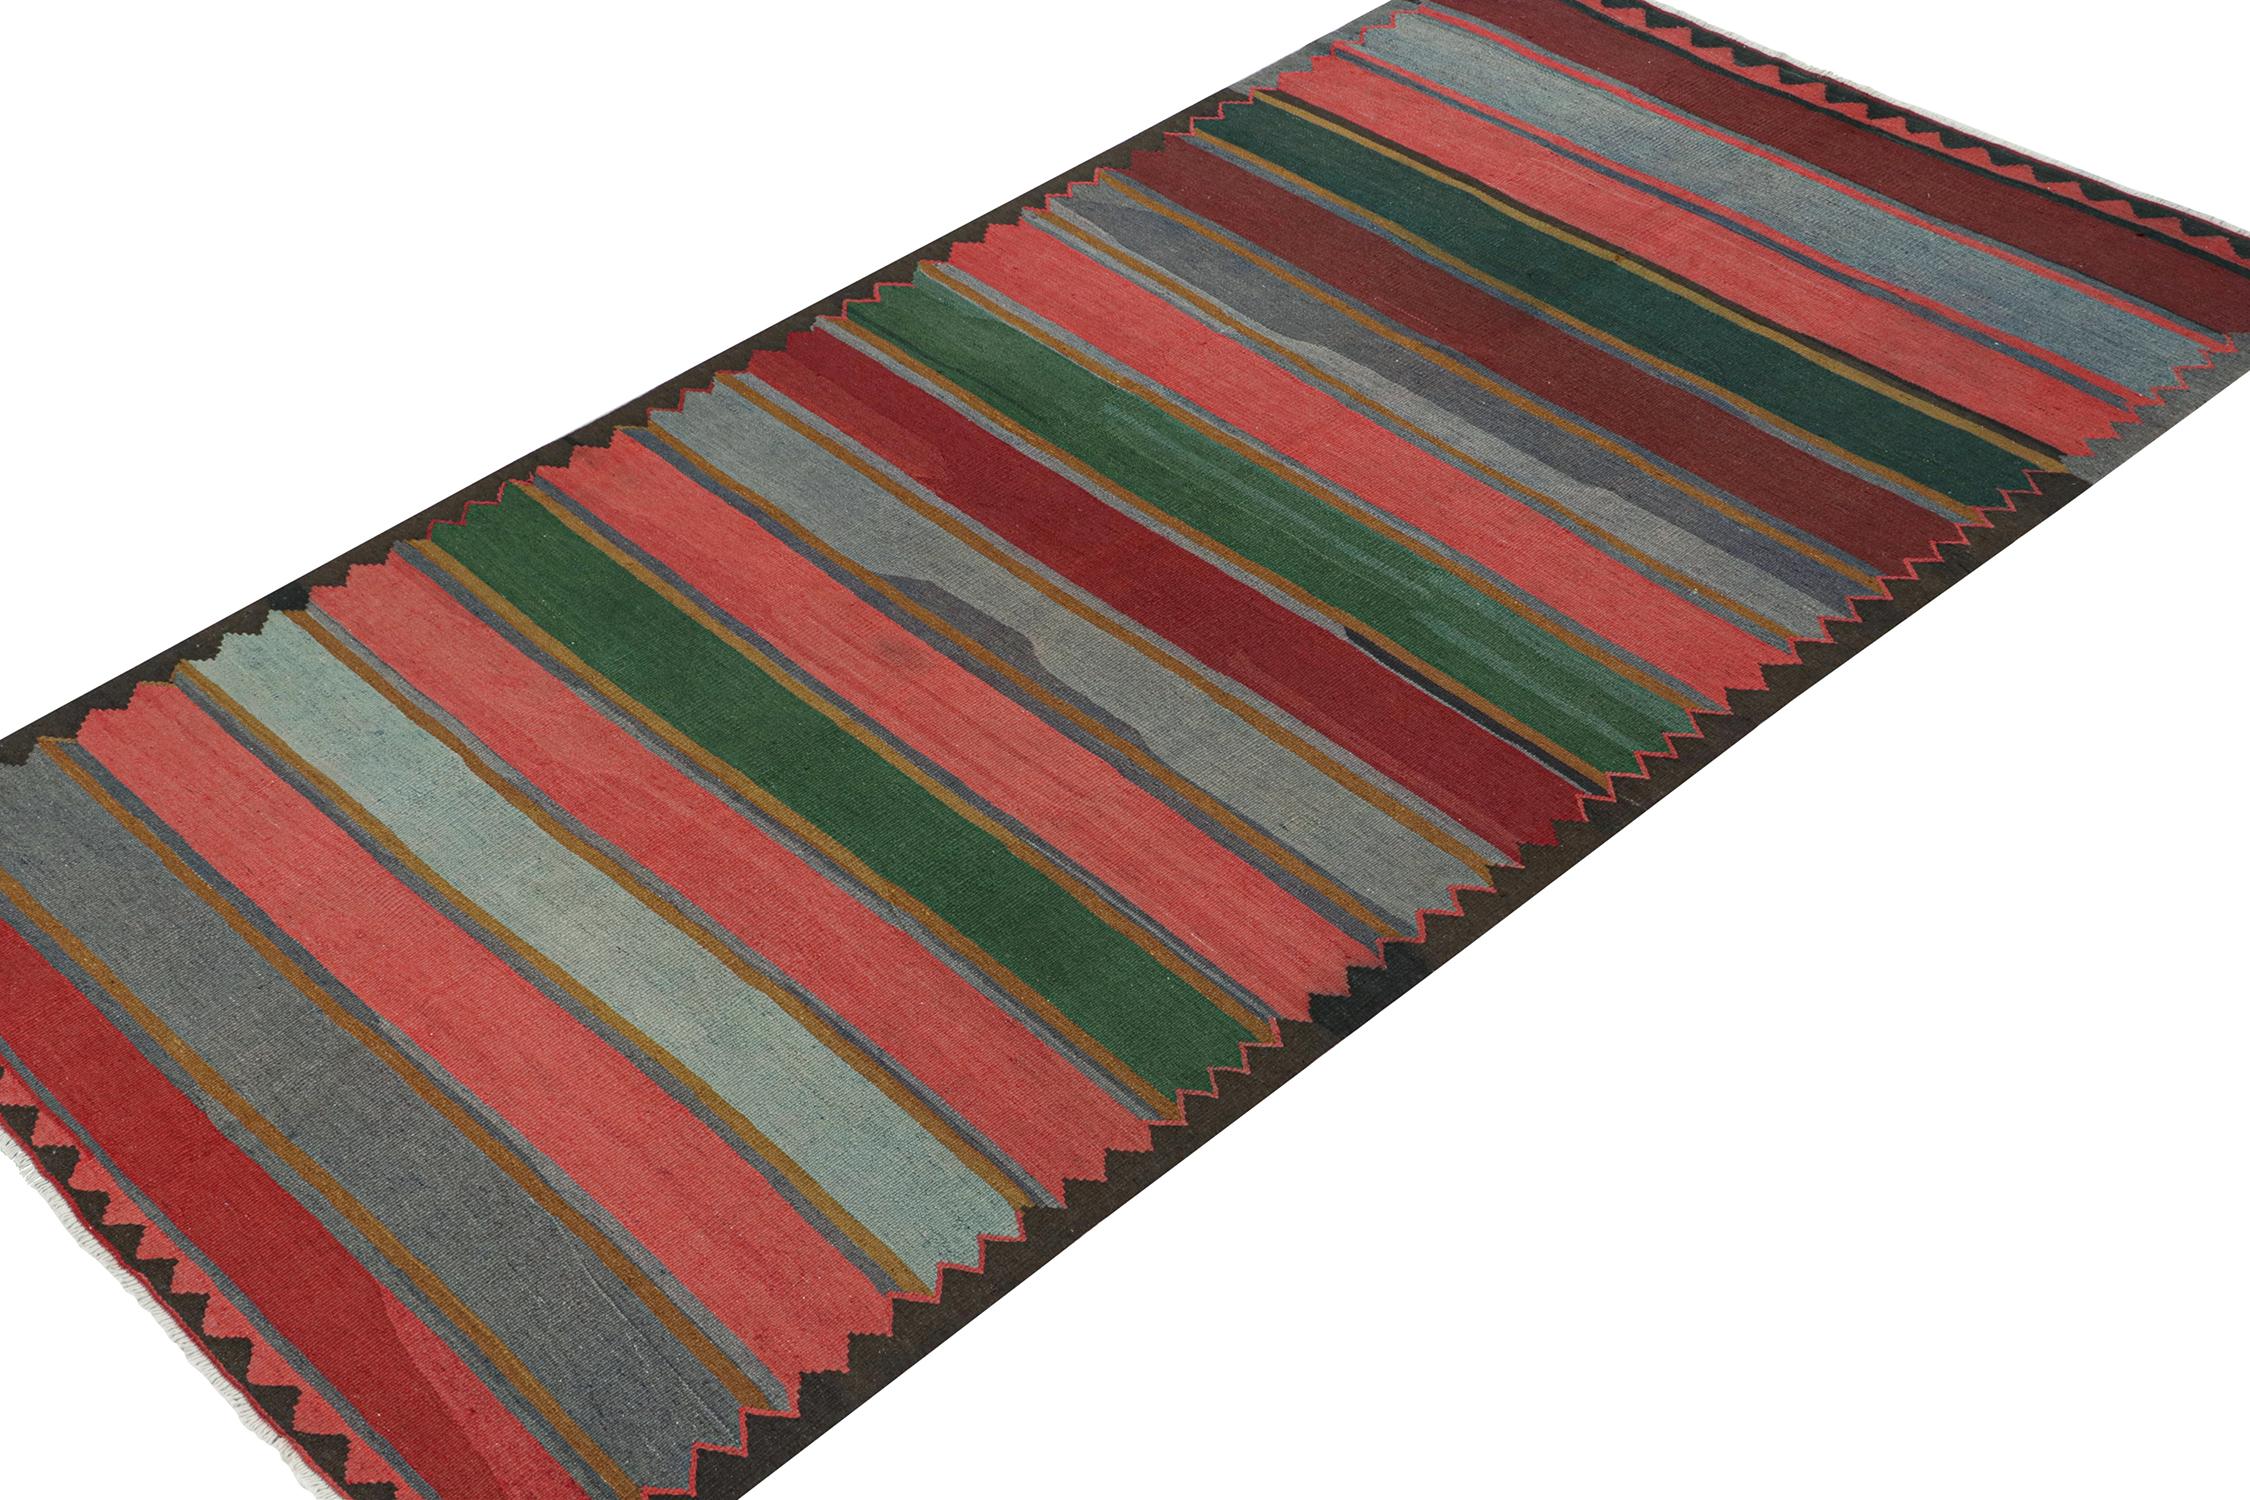 This vintage 5x11 Persian Kilim is a new addition of Bidjar provenance in Rug & Kilim's rare tribal curations. Handwoven in wool circa 1950-1960.

Further on the Design: 

Bidjar Kilims like this are reputed for their durability and distinct